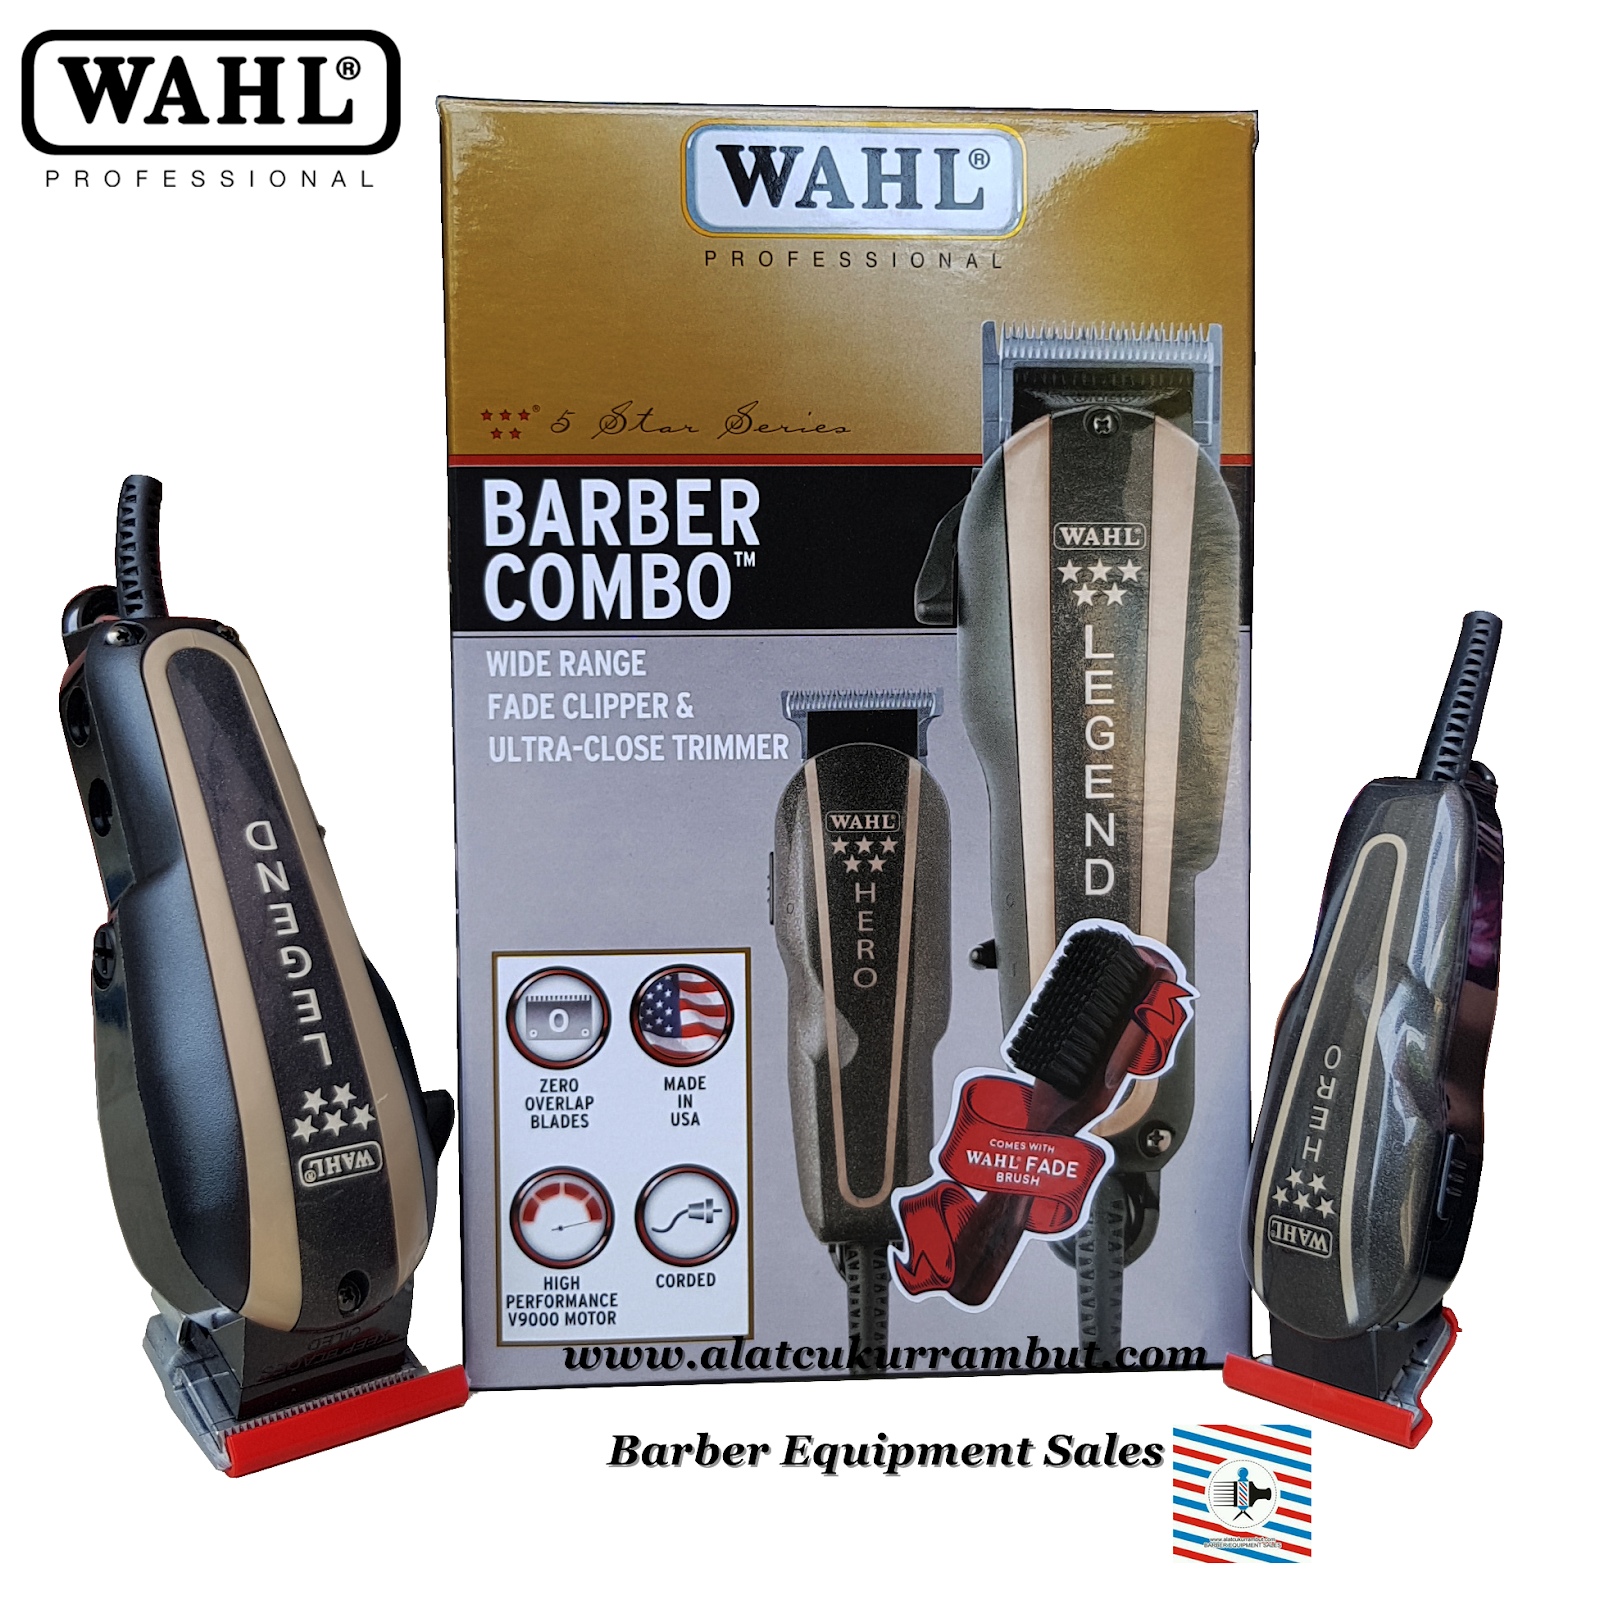 WAHL Barber Combo